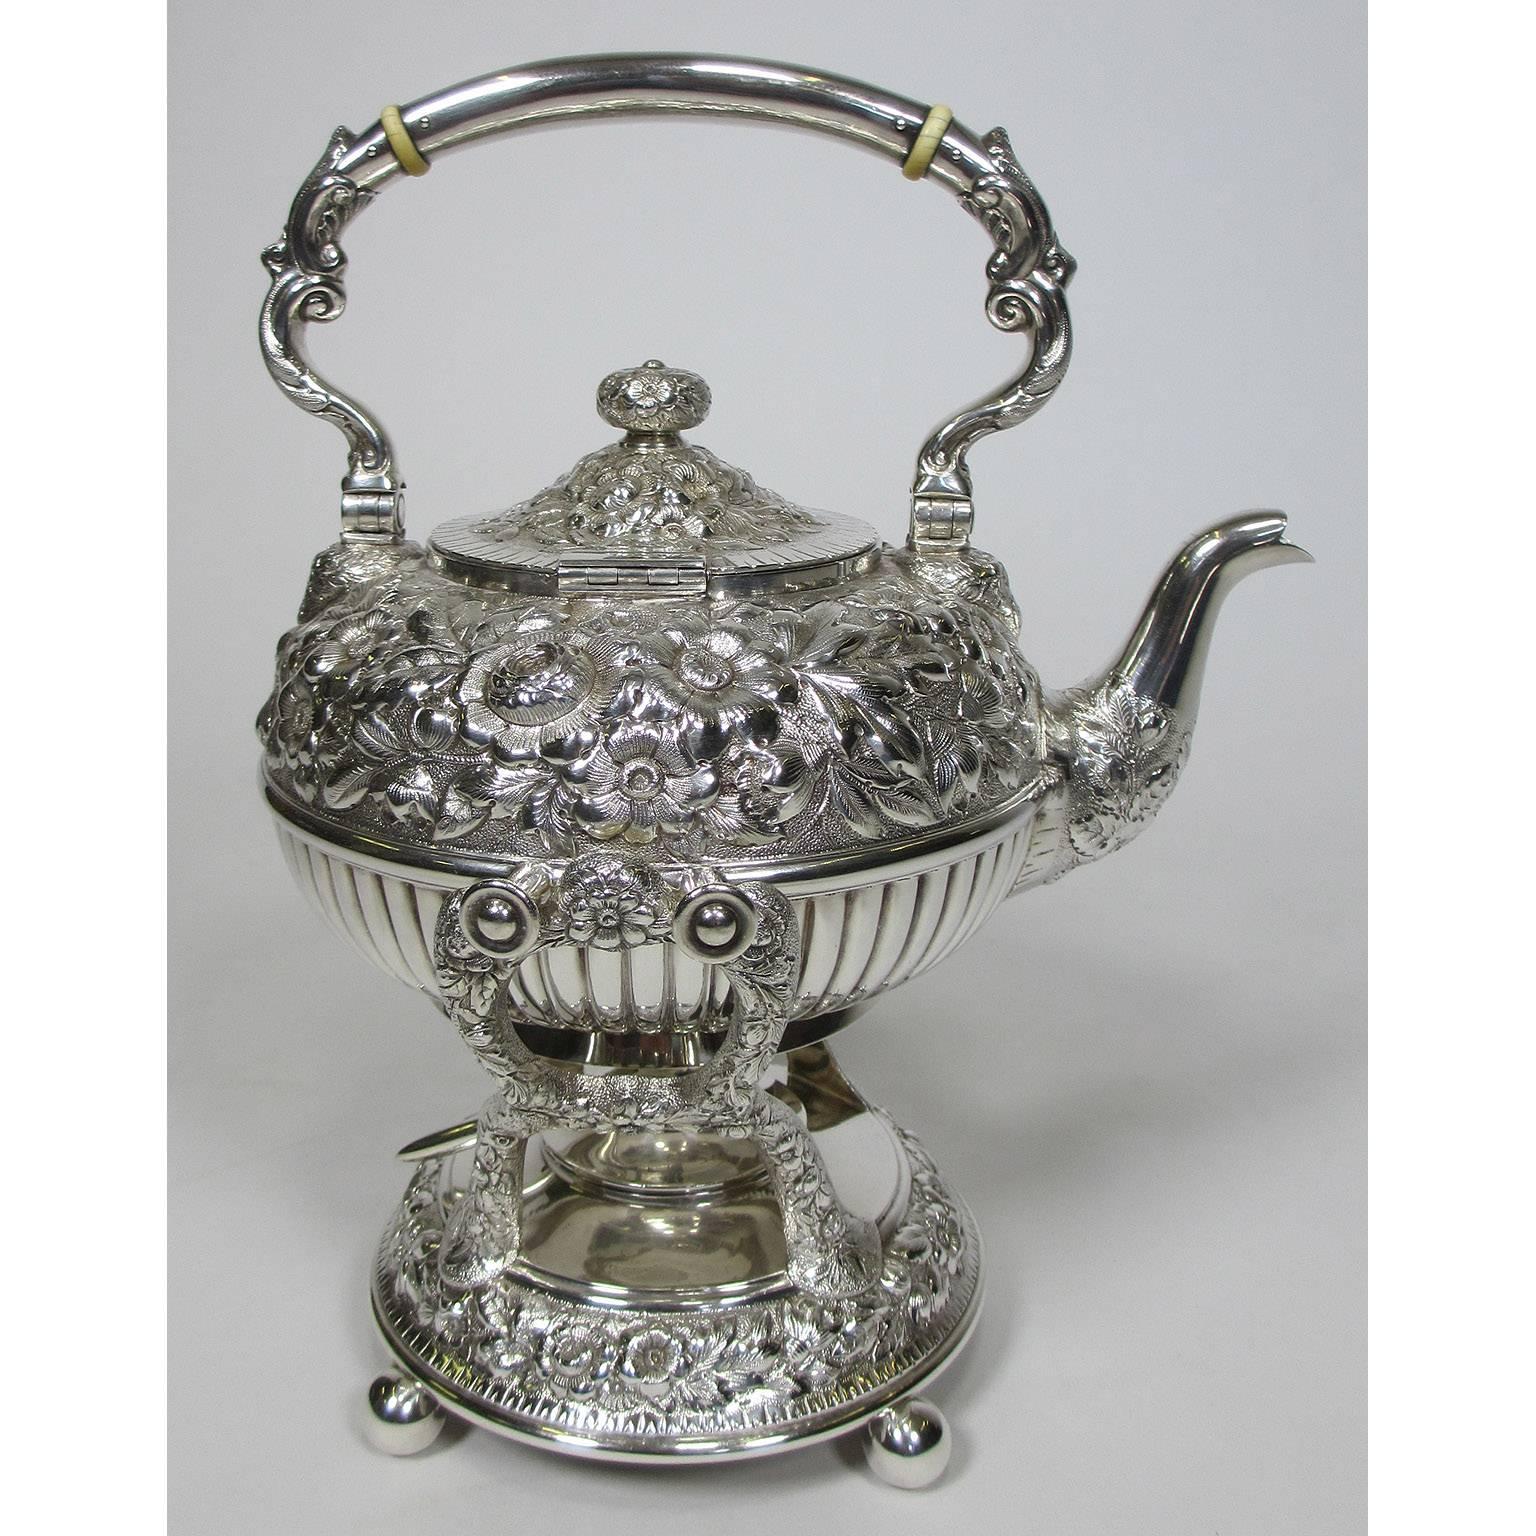 A very finely chased sterling silver six piece tea and coffee service by Geo C. Shreve & Co. Each finely embellished silver piece chased with floral and scrolled decorations. Comprising of a hot water samovar with burner, a coffee pot, a tea pot, a